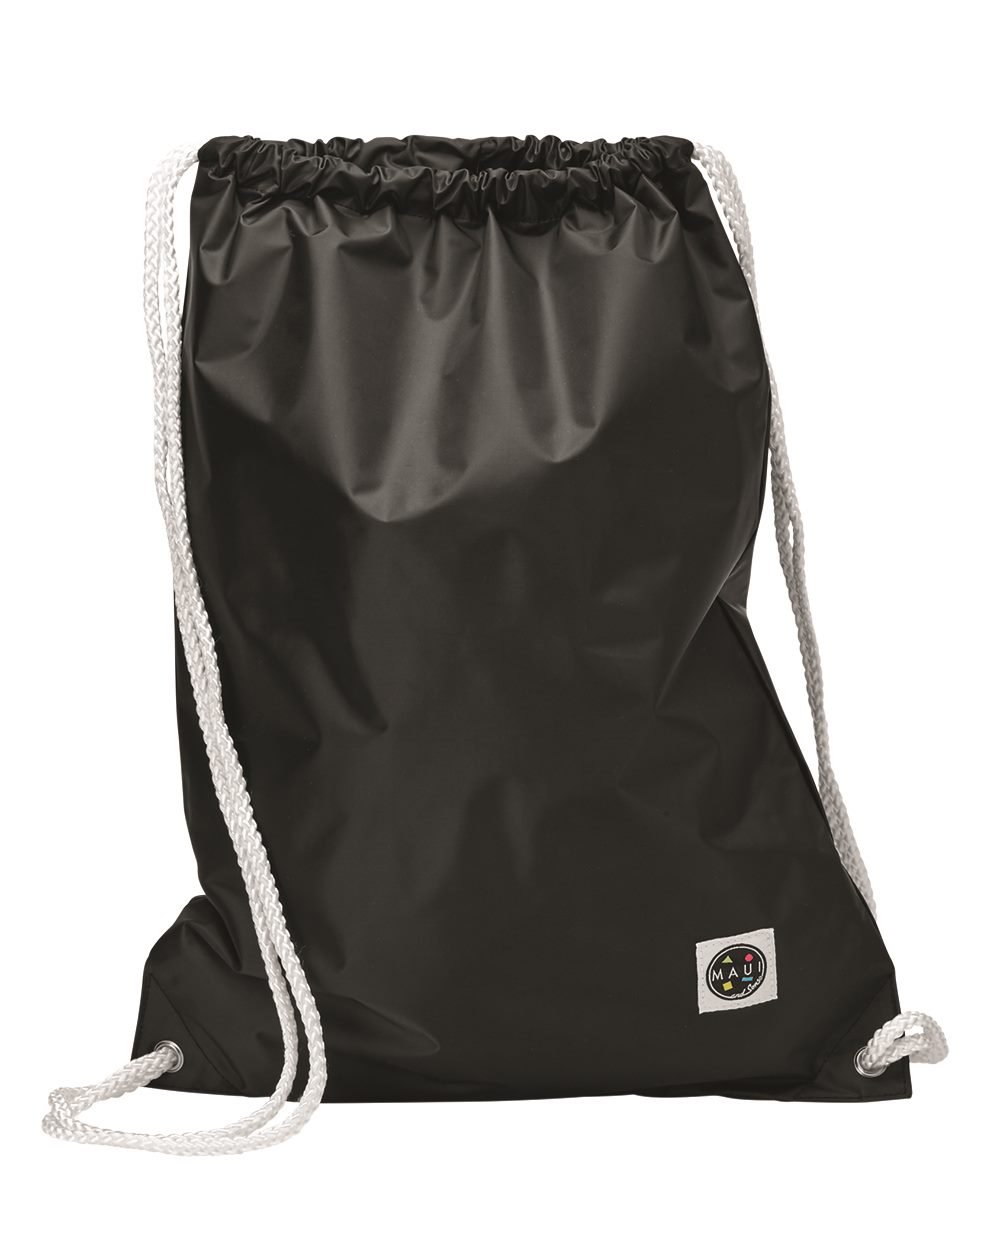 Maui and Sons MS8892 - Drawstring Cinch Backpack